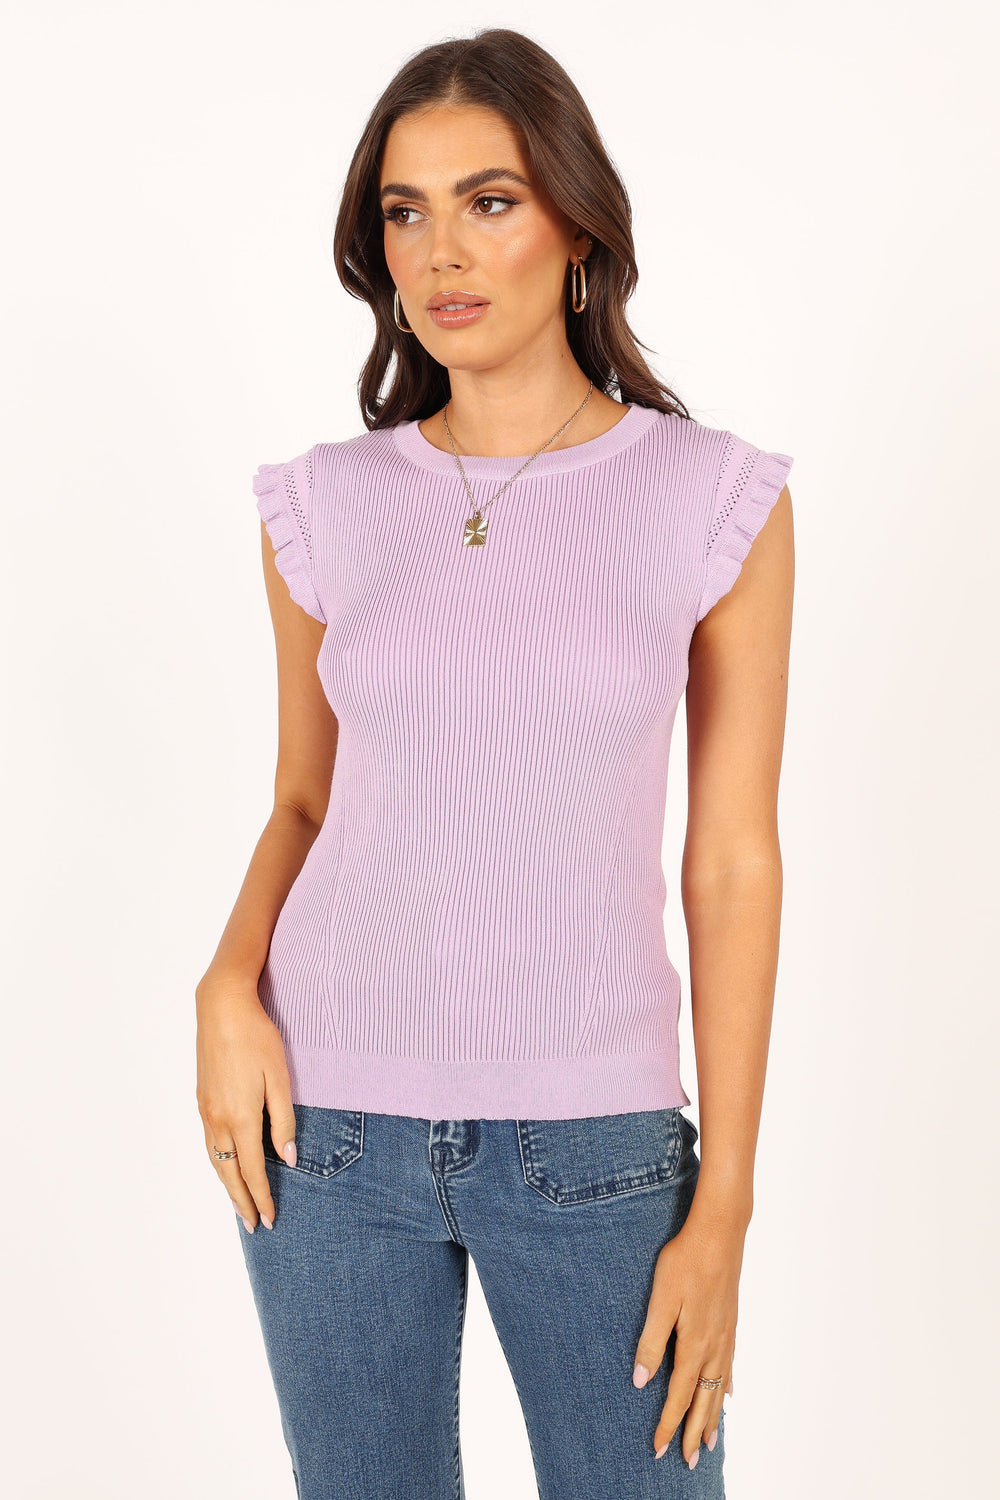 TOPS @Henderson Knit Top - Lilac